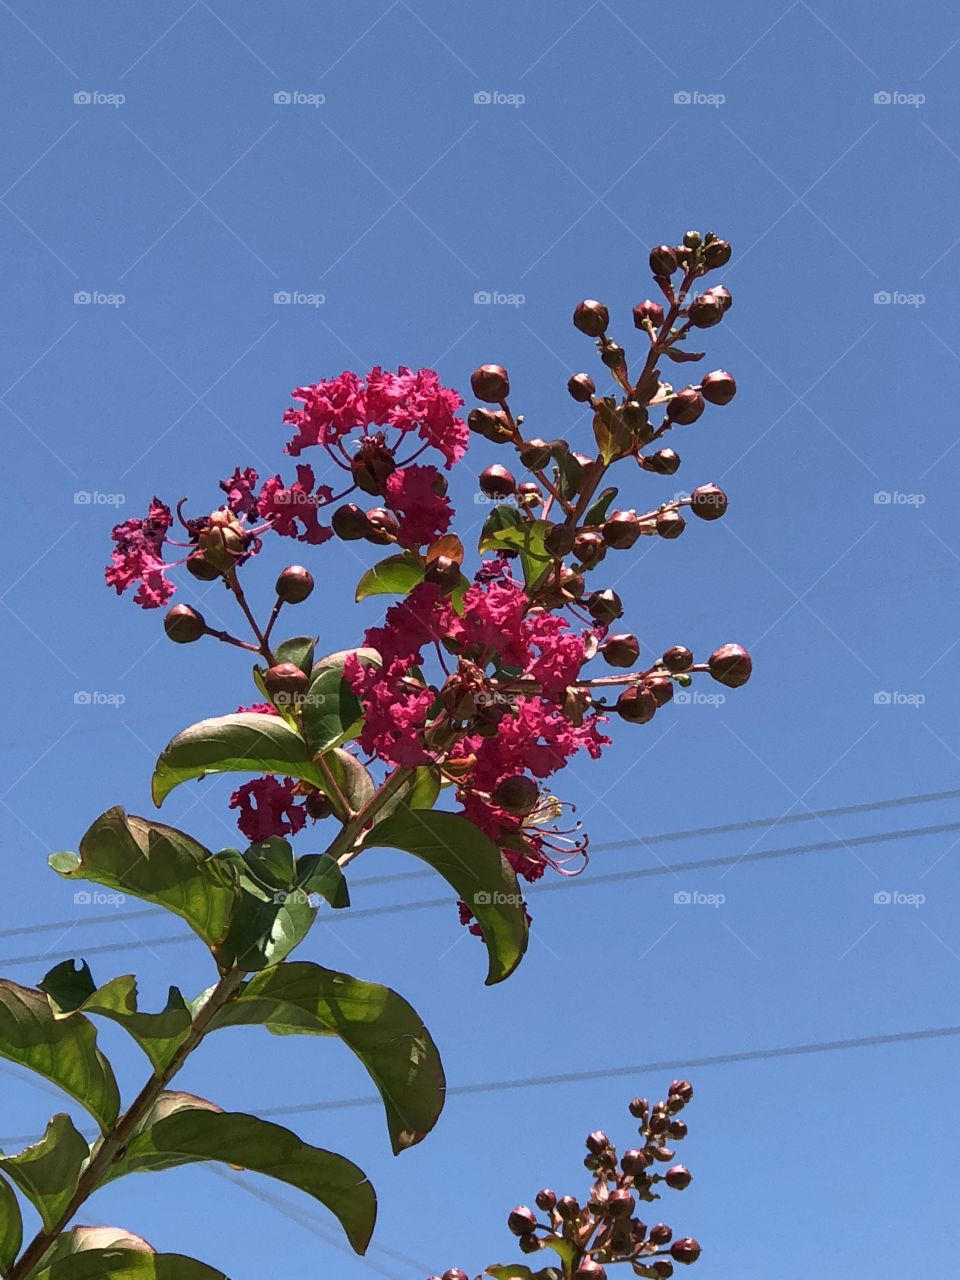 Blue sky, power lines, flowers and buds